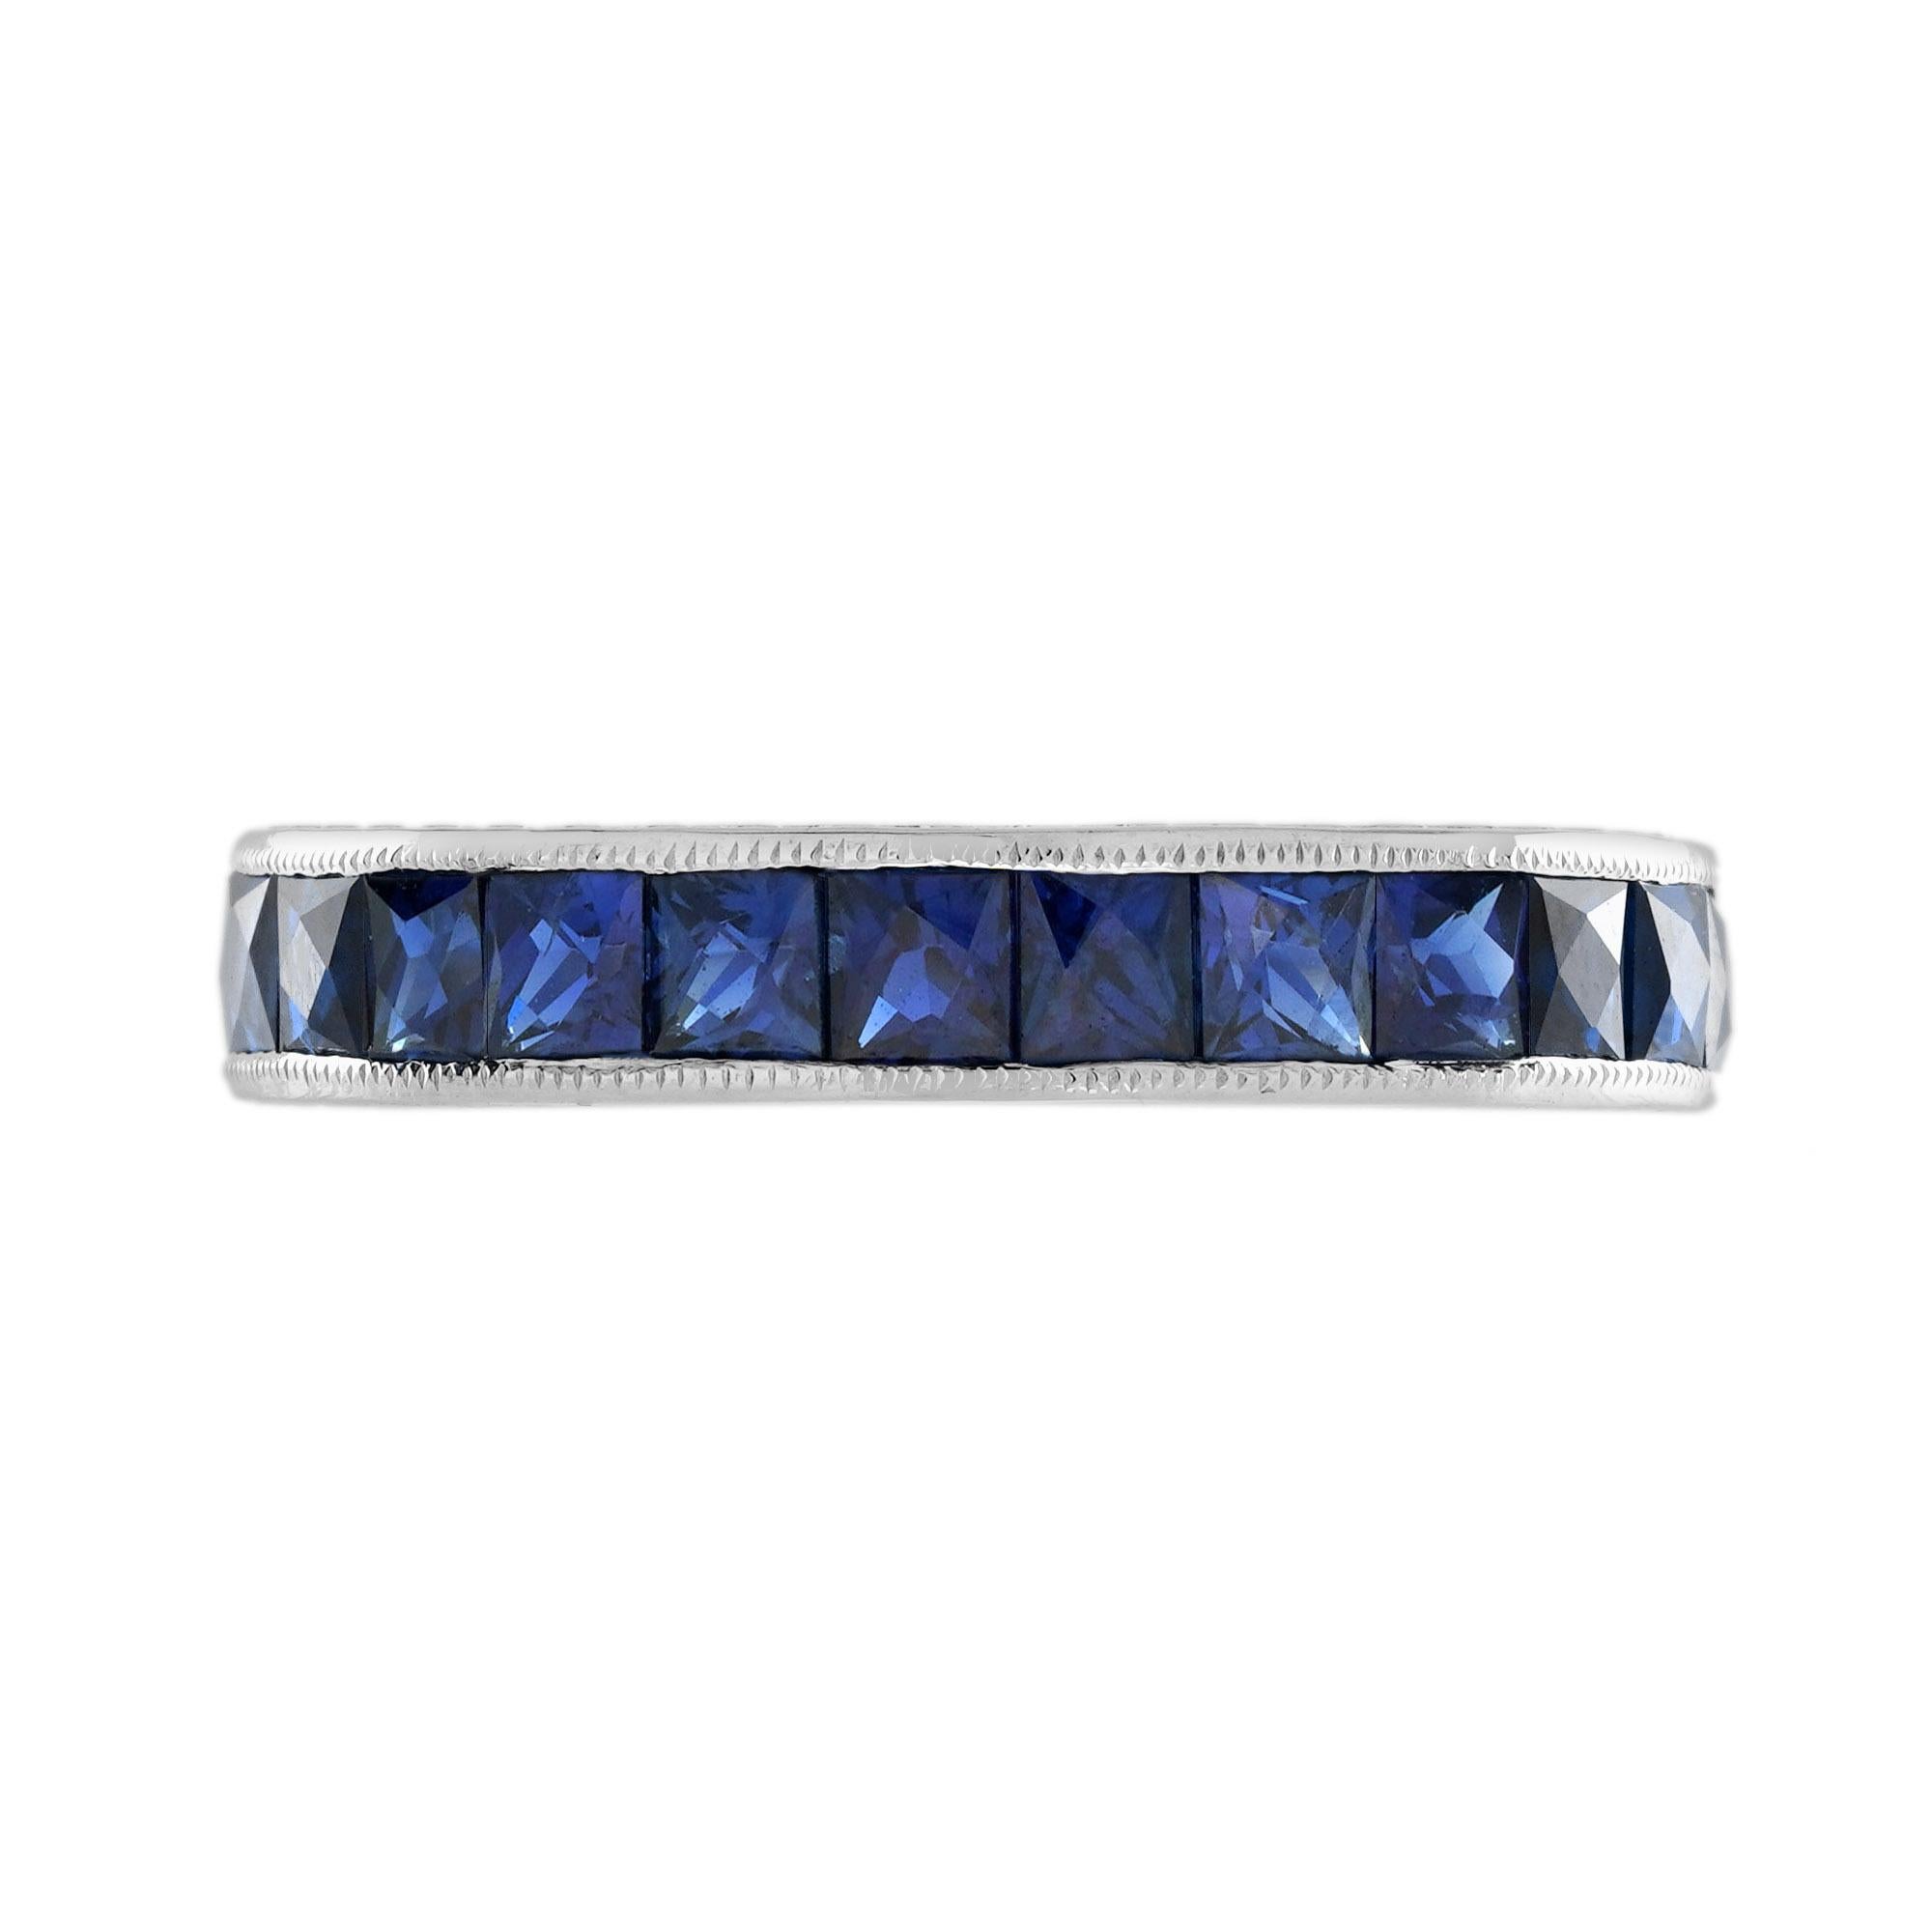 Square Cut 3.25 Ct. Blue Sapphire Antique Style Eternity Band Ring in Platinum 950 For Sale